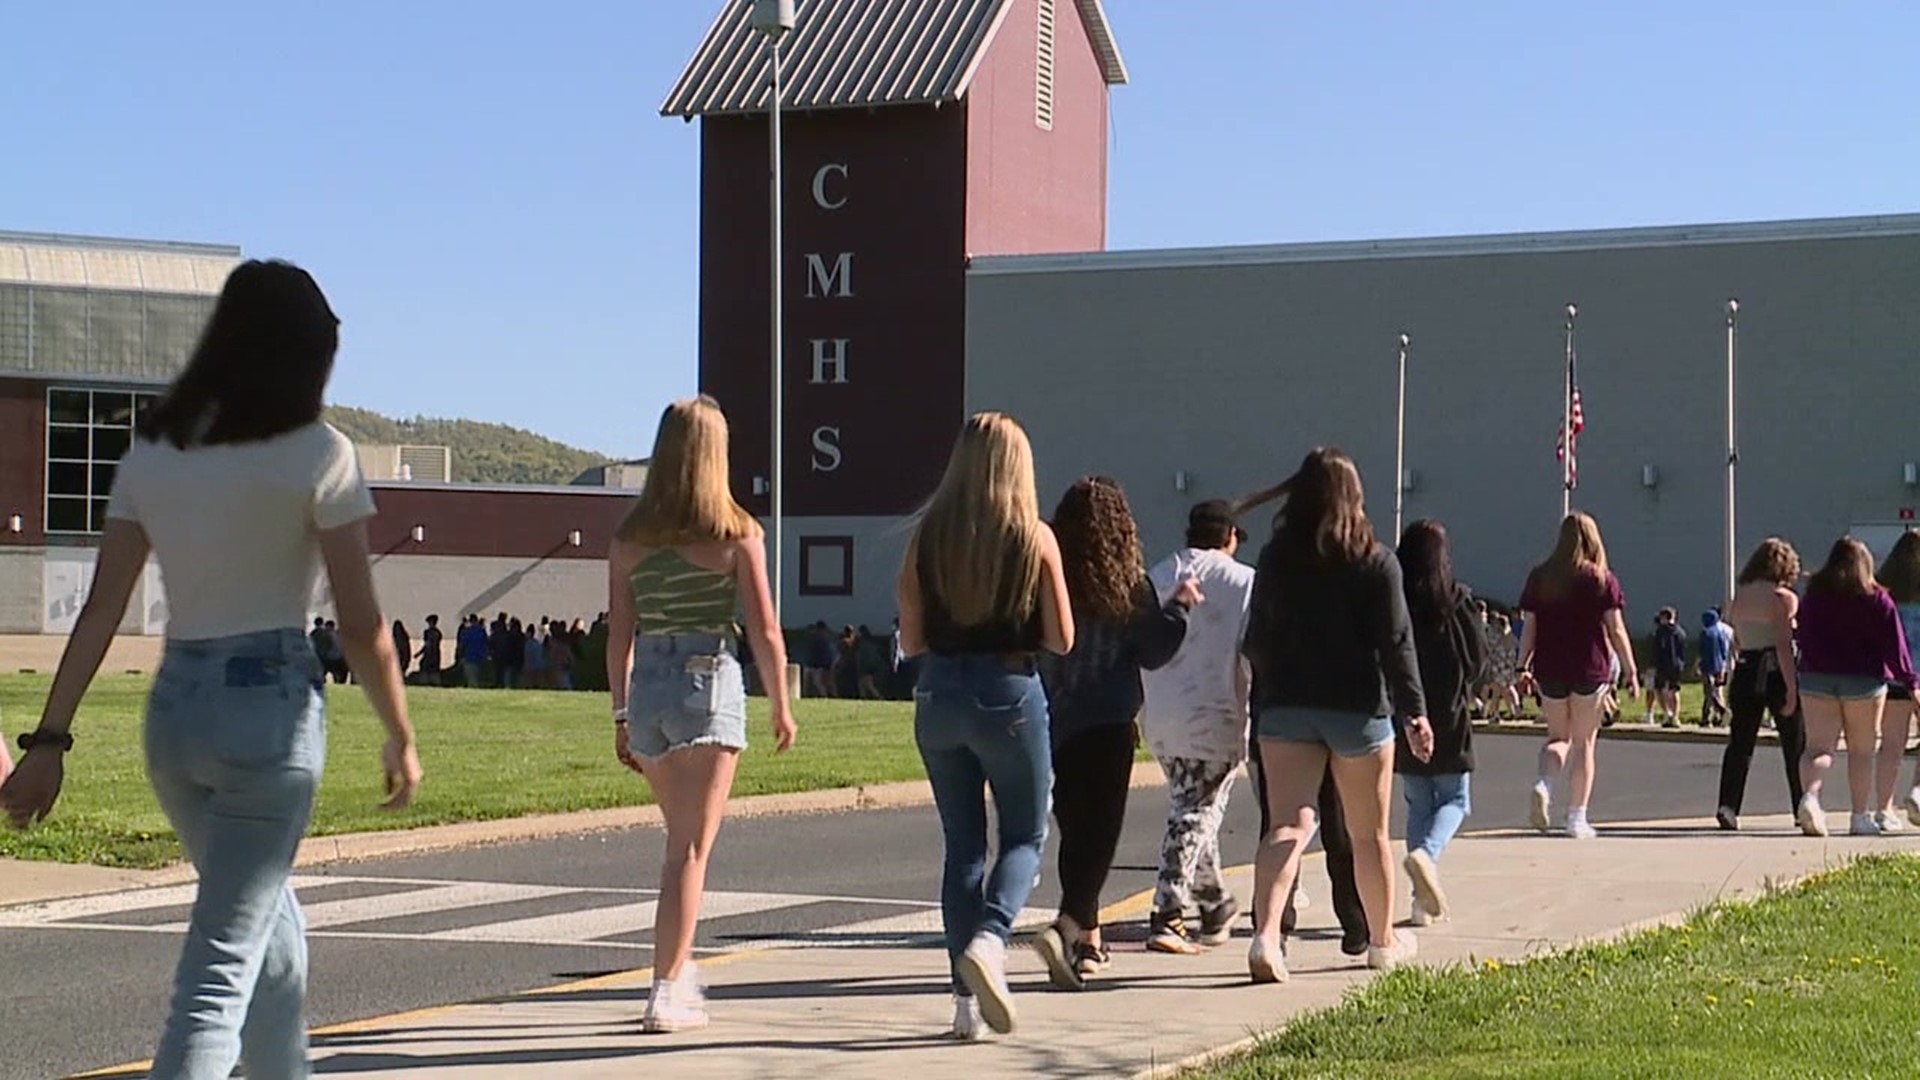 Students at Central Mountain High School walked around campus in support of mental health awareness.